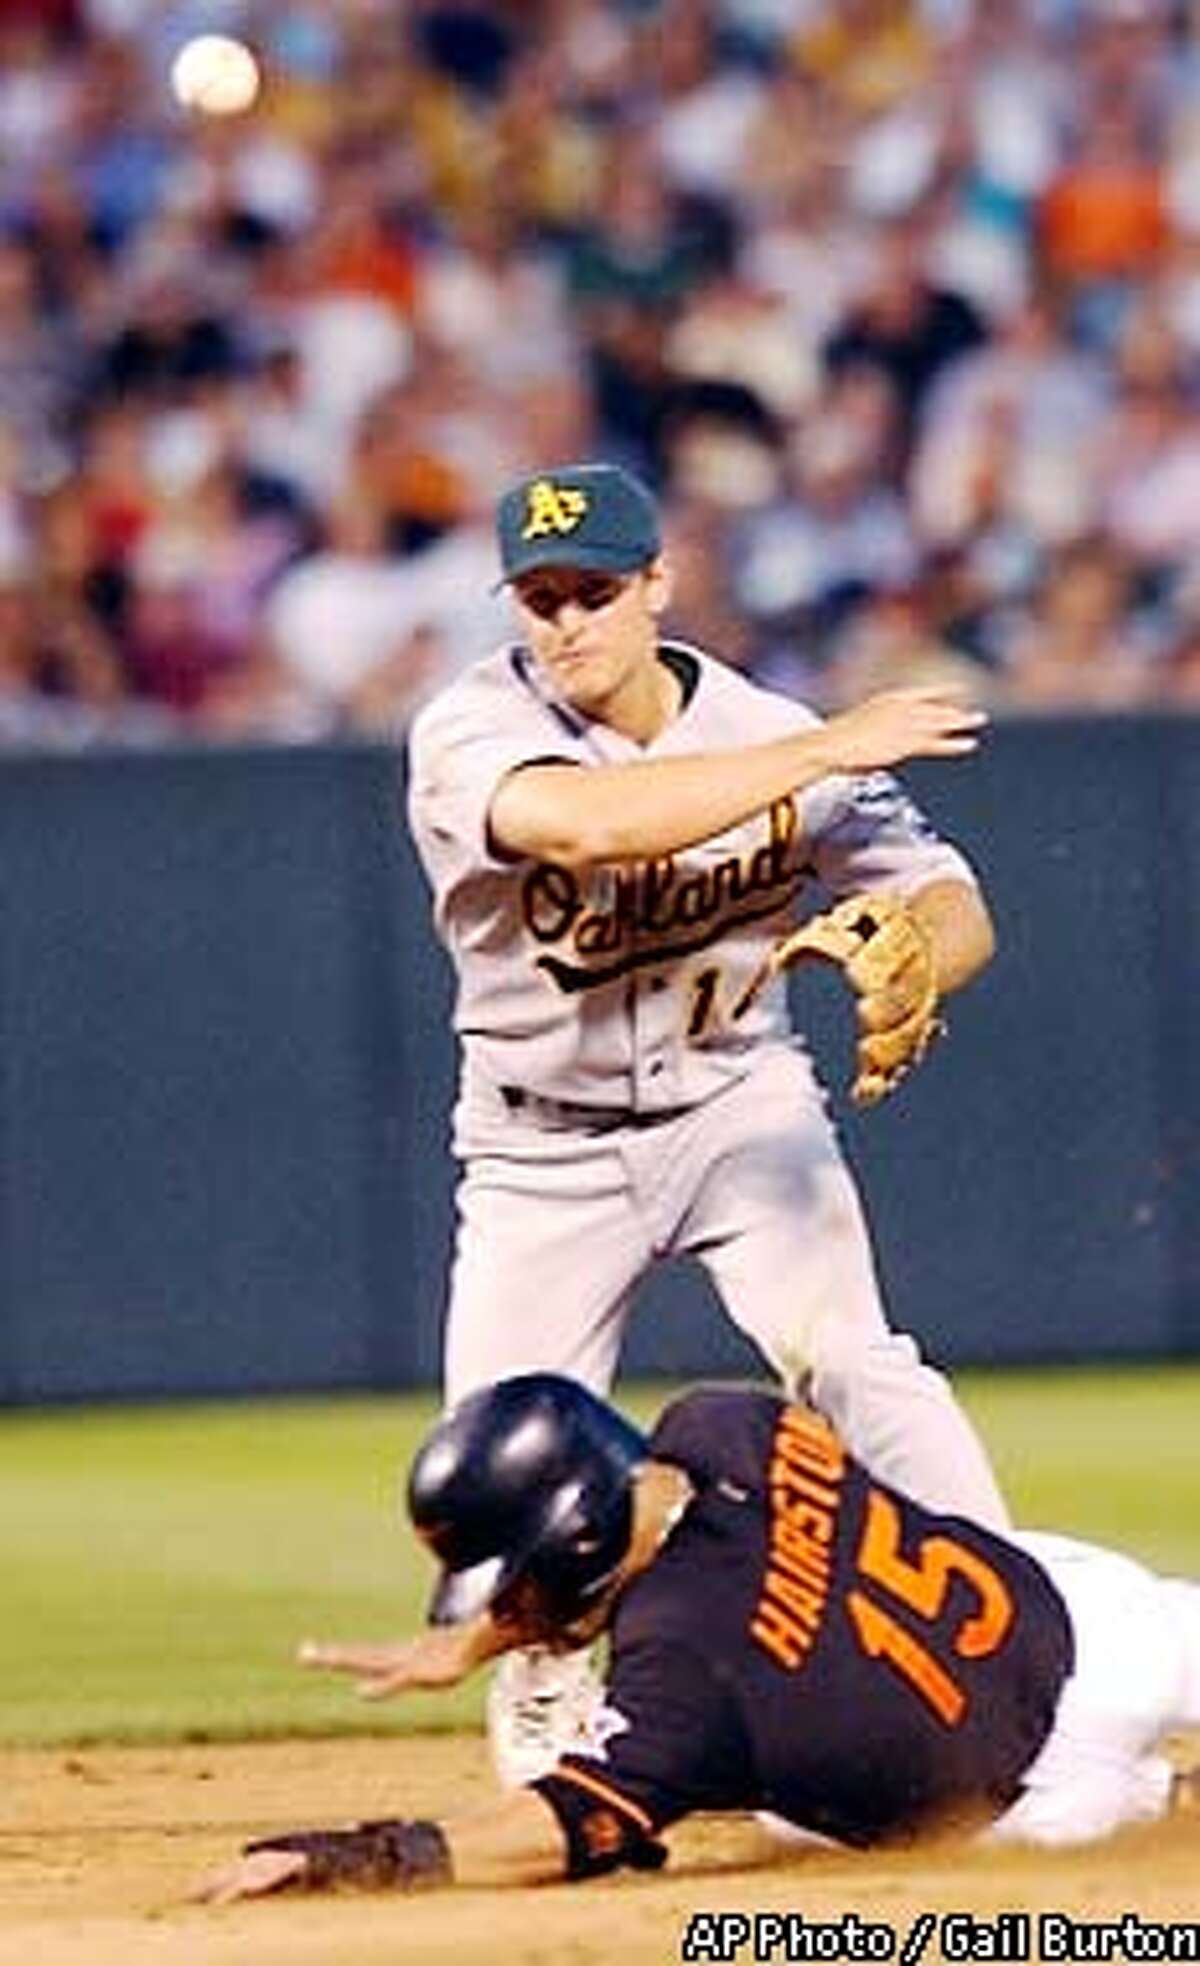 Oakland Athletics second baseman Mark Ellis, top, forces out Baltimore Orioles' Jerry Hairston (15) and throws to first to complete the double play on Melvin Mora in the fifth inning Friday, July 12, 2002, at Camden Yards in Baltimore. (AP Photo/Gail Burton)